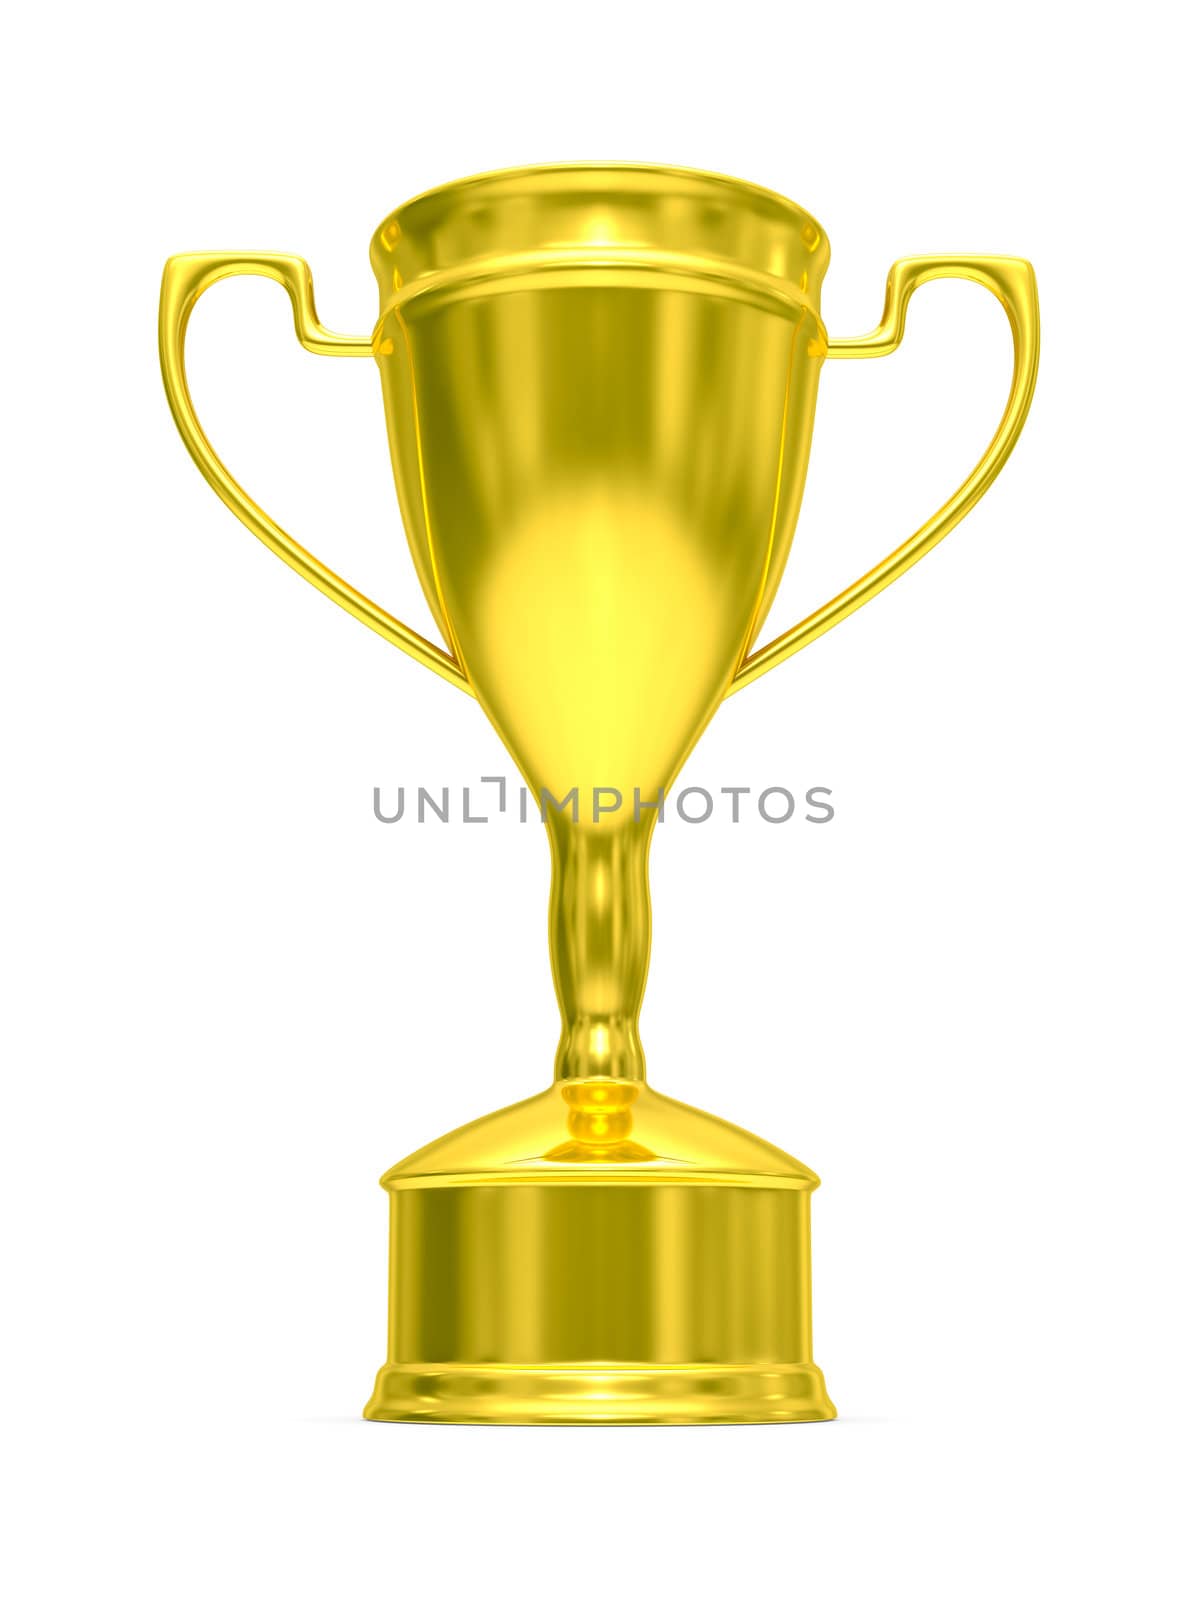 Gold cup of winner on white background. Isolated 3D image.